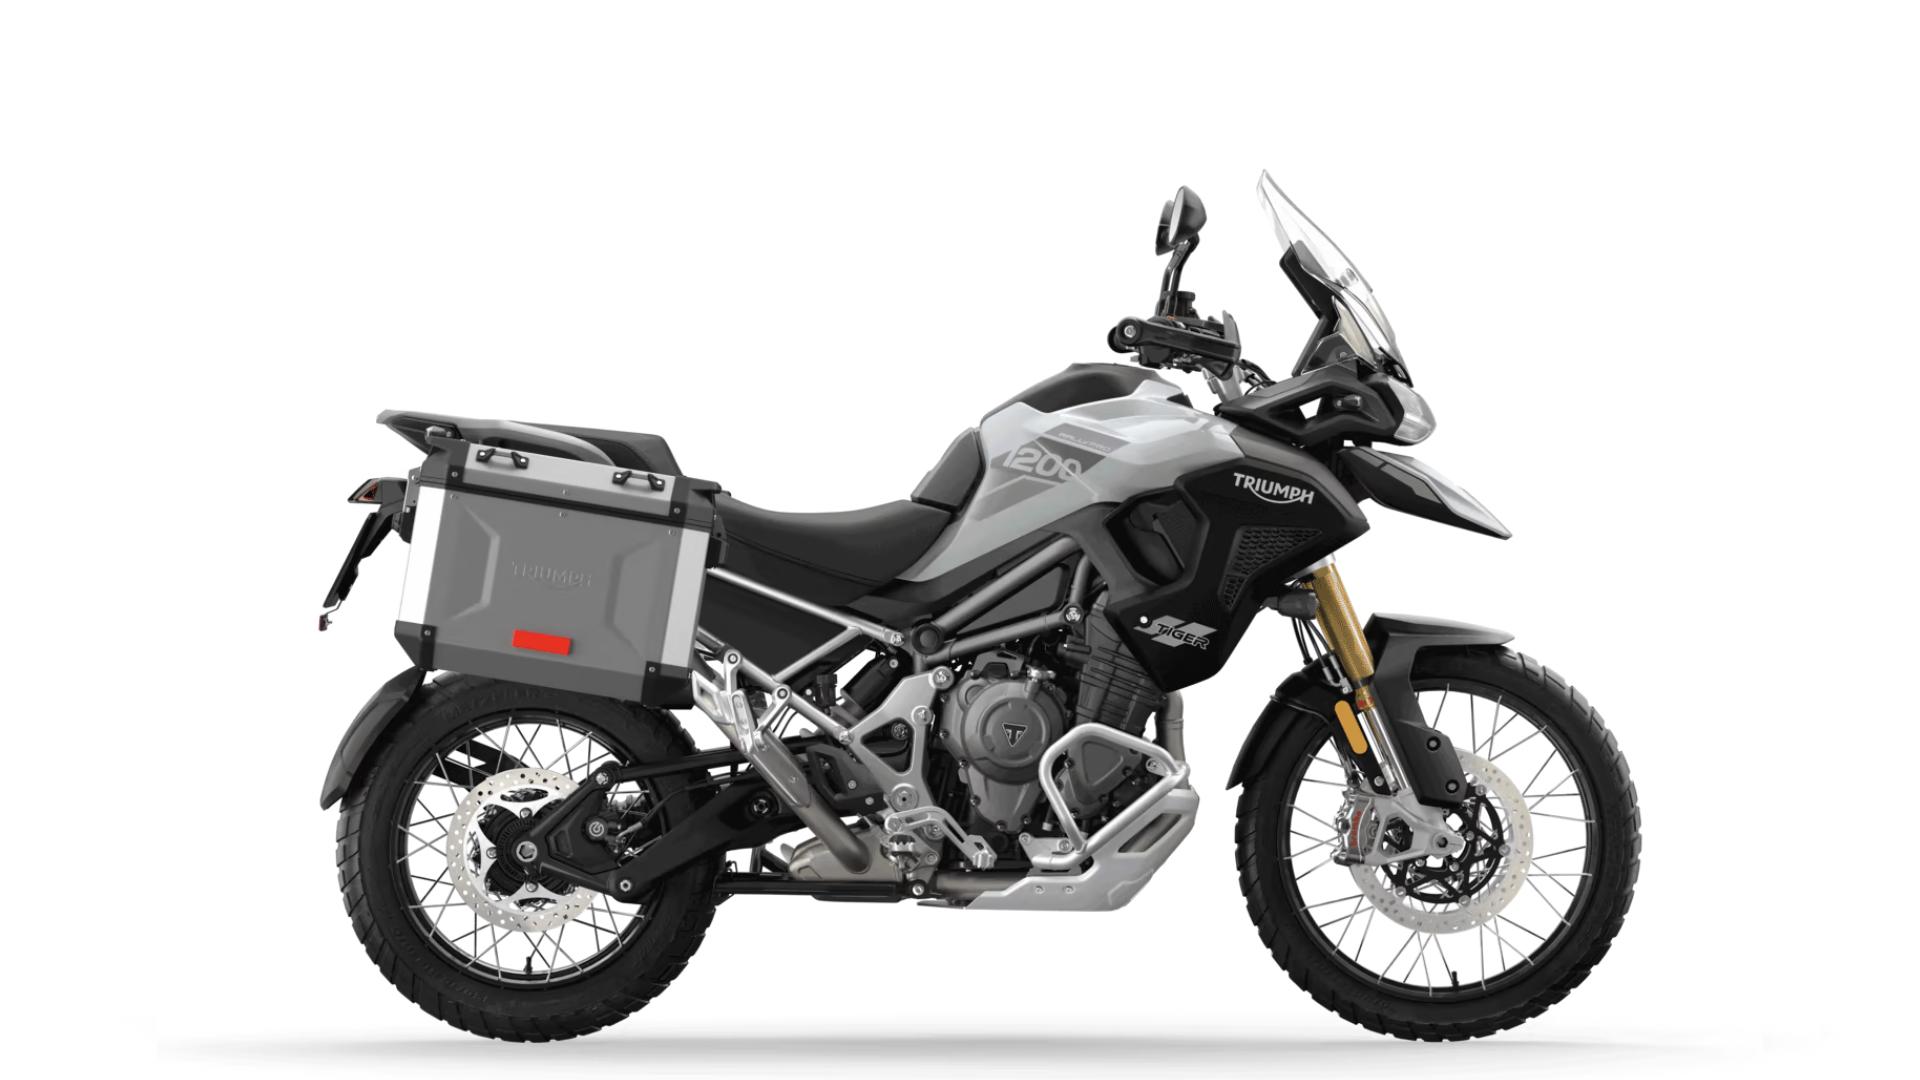 TIGER 1200 RALLY PRO EXPEDITION